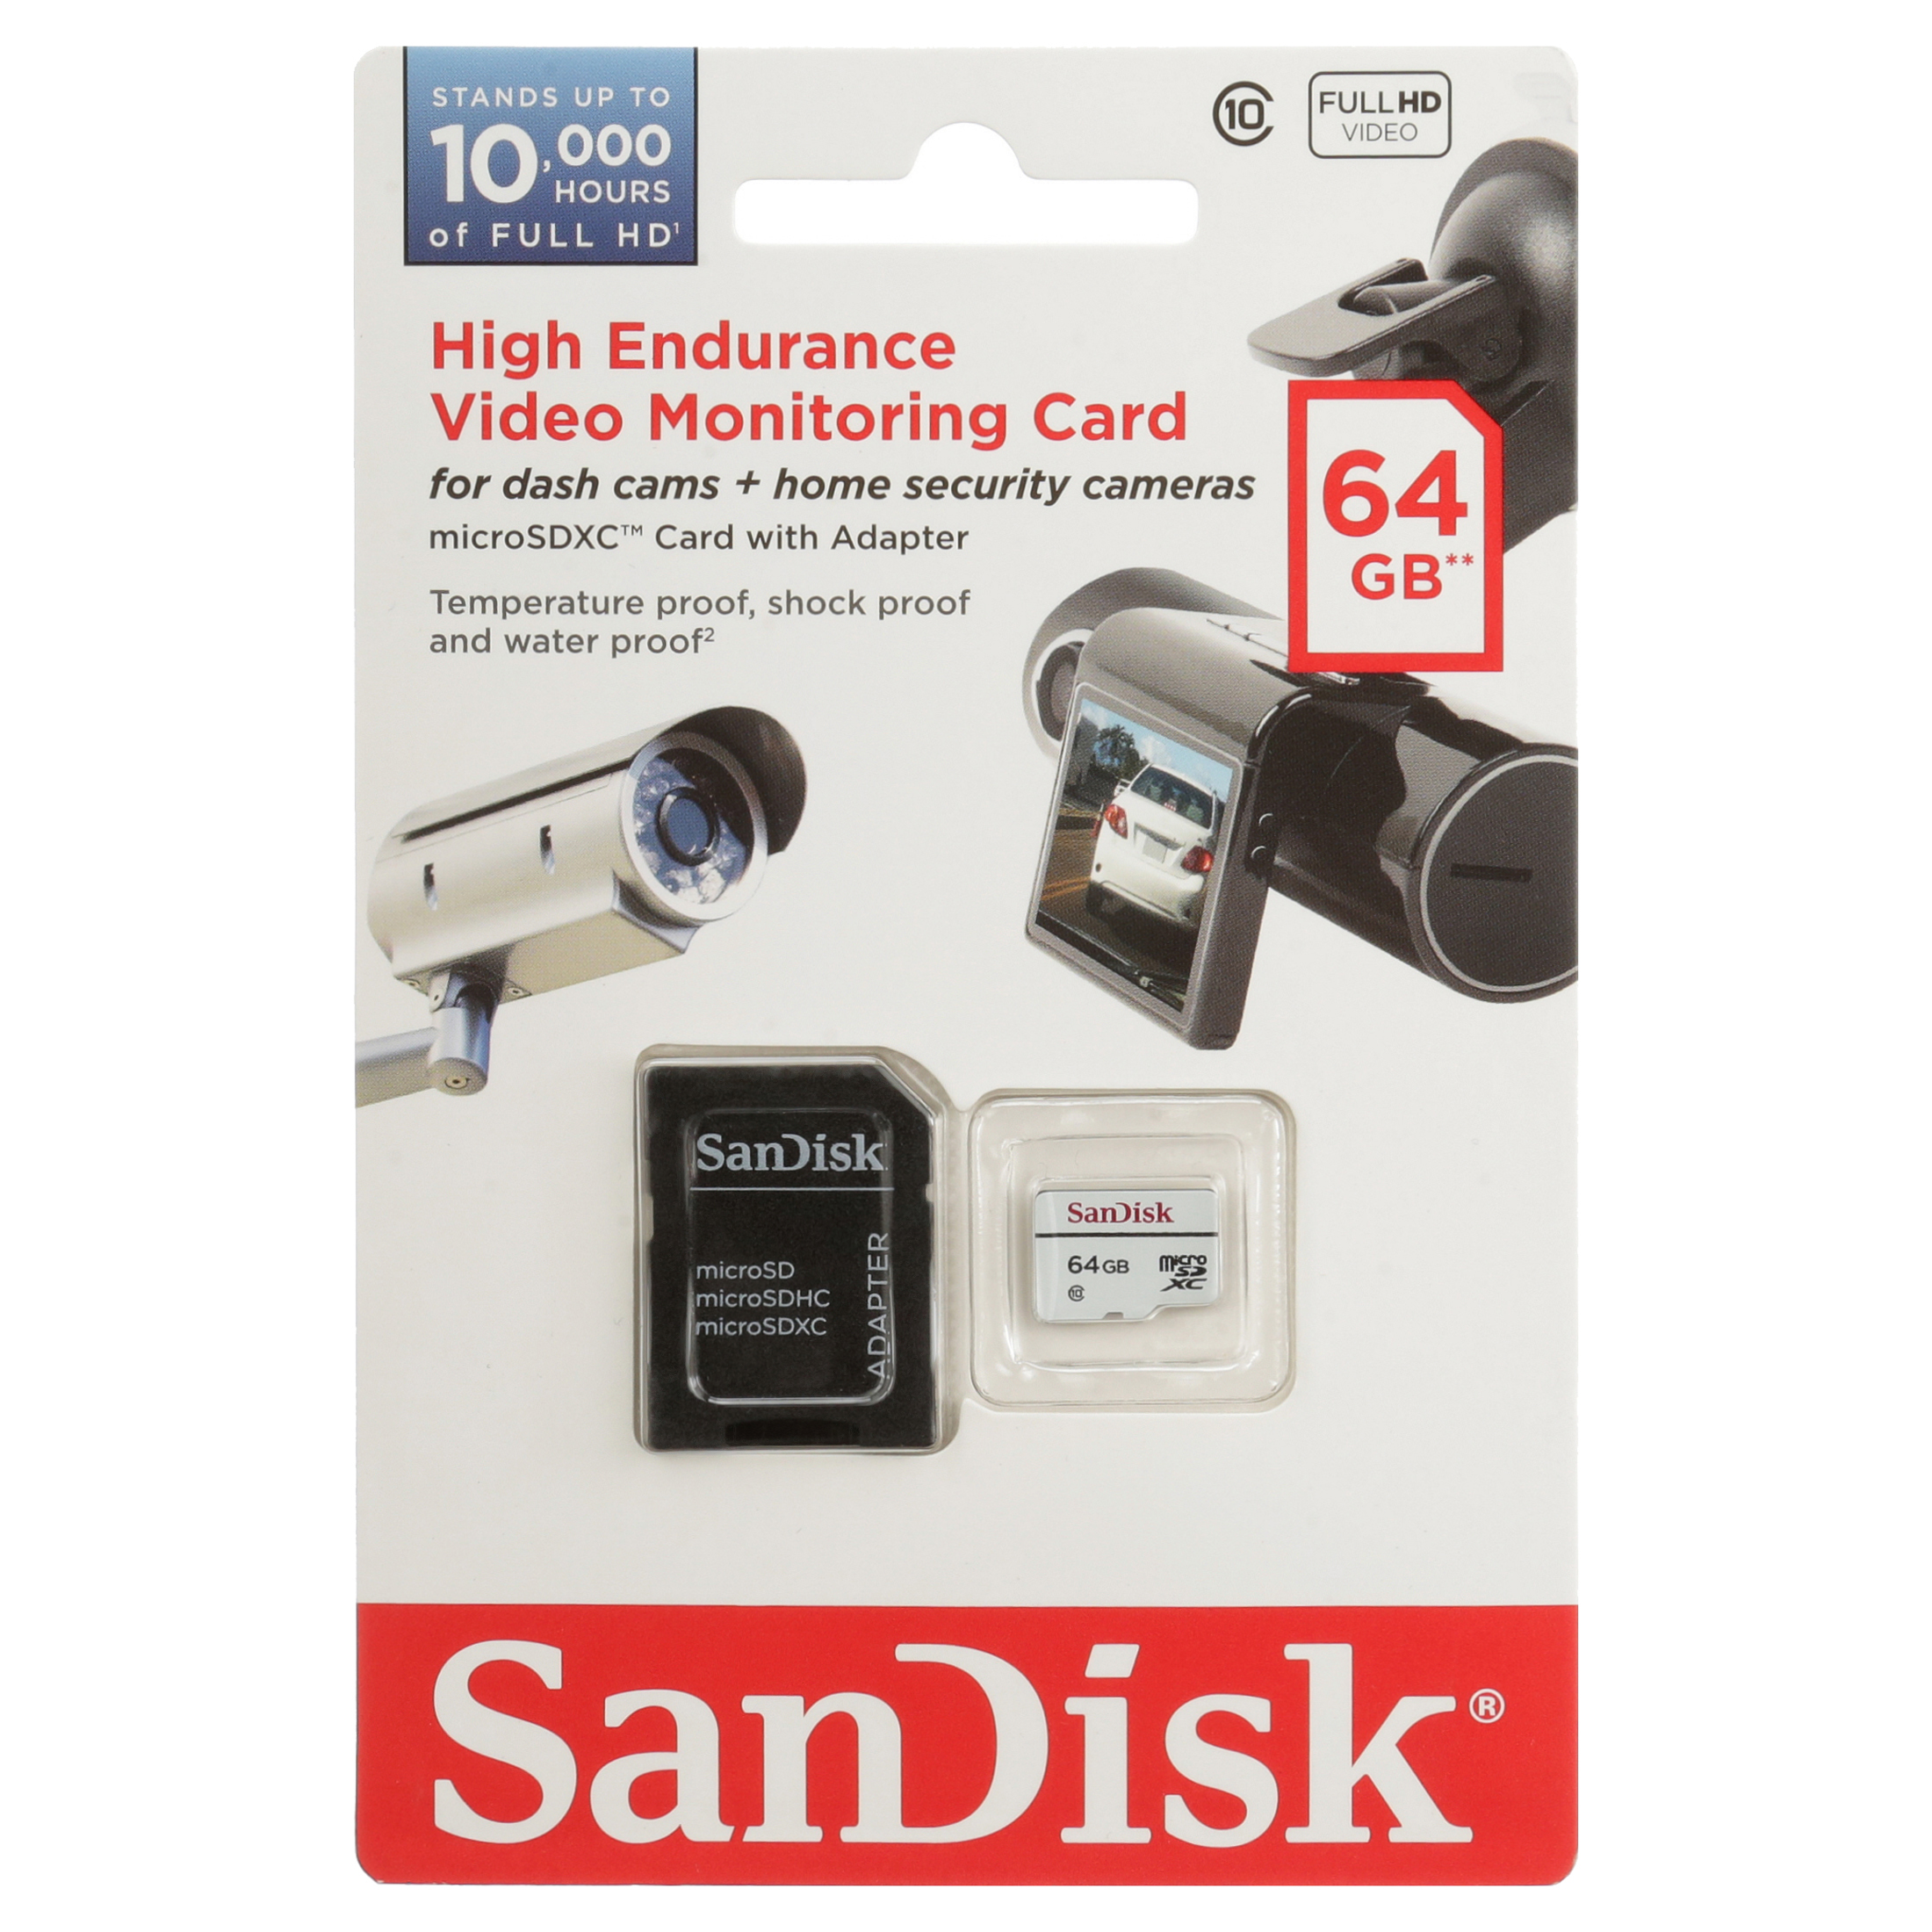 SanDisk 64GB microSDXC High Endurance Video Monitoring Card with Adapter - C10, Full HD, Micro SD Card - SDSDQQ-064G-G46A - image 4 of 8